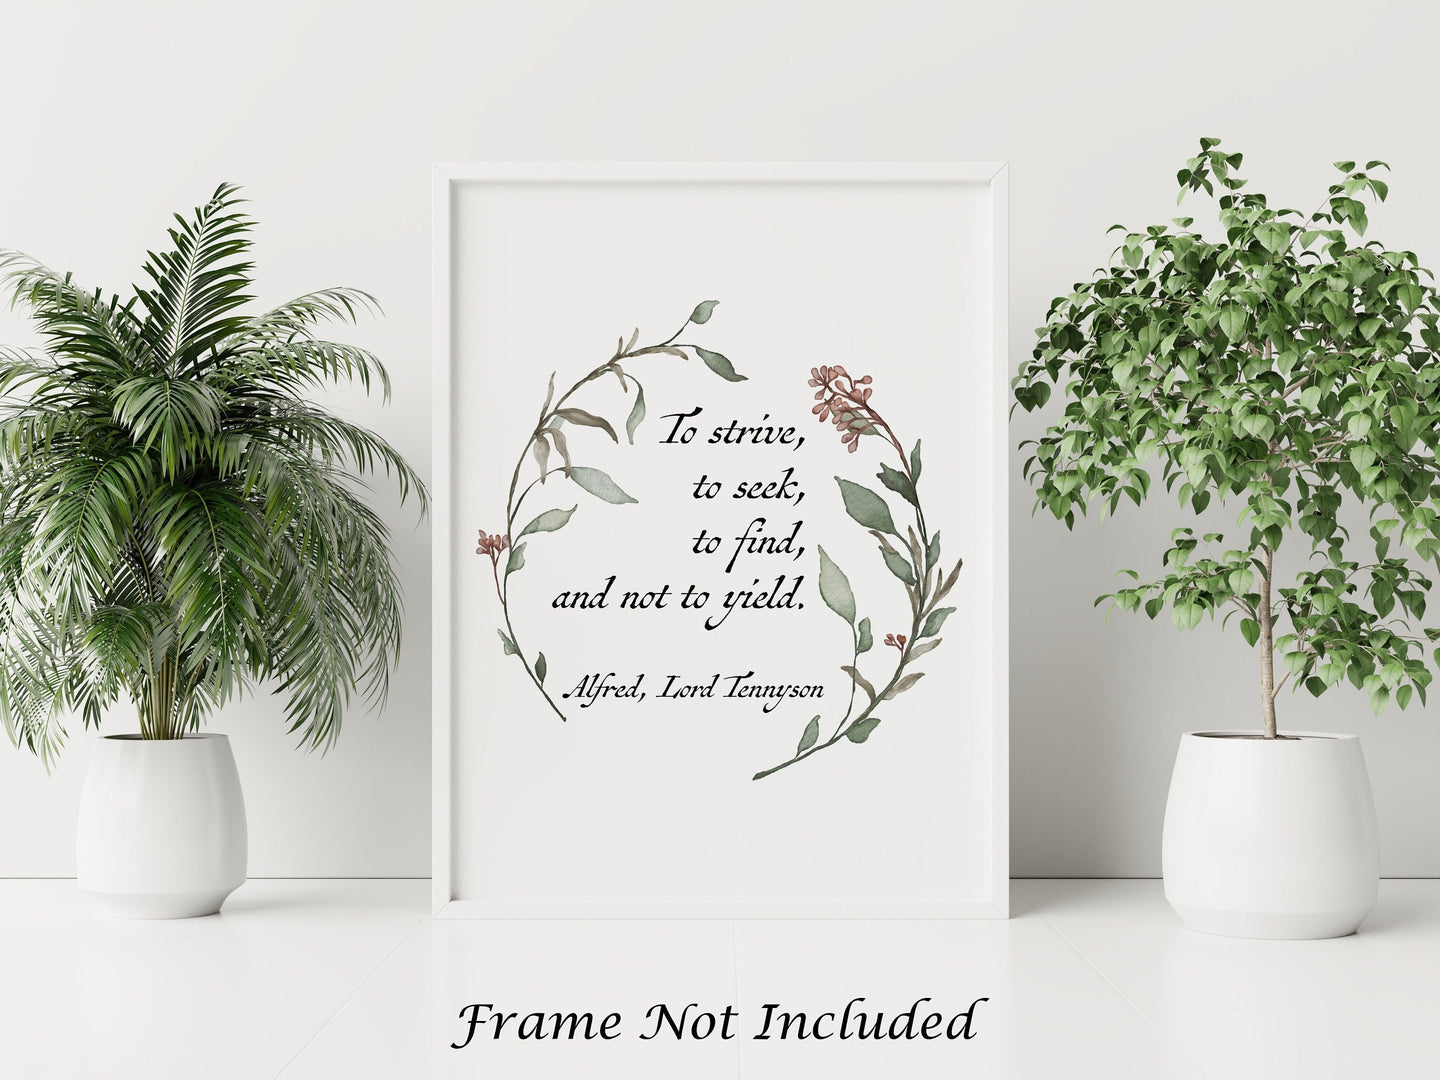 To strive, to seek, to find, and not to yield Alfred Lord Tennyson Quote Poster Print - Inspirational Wall Art